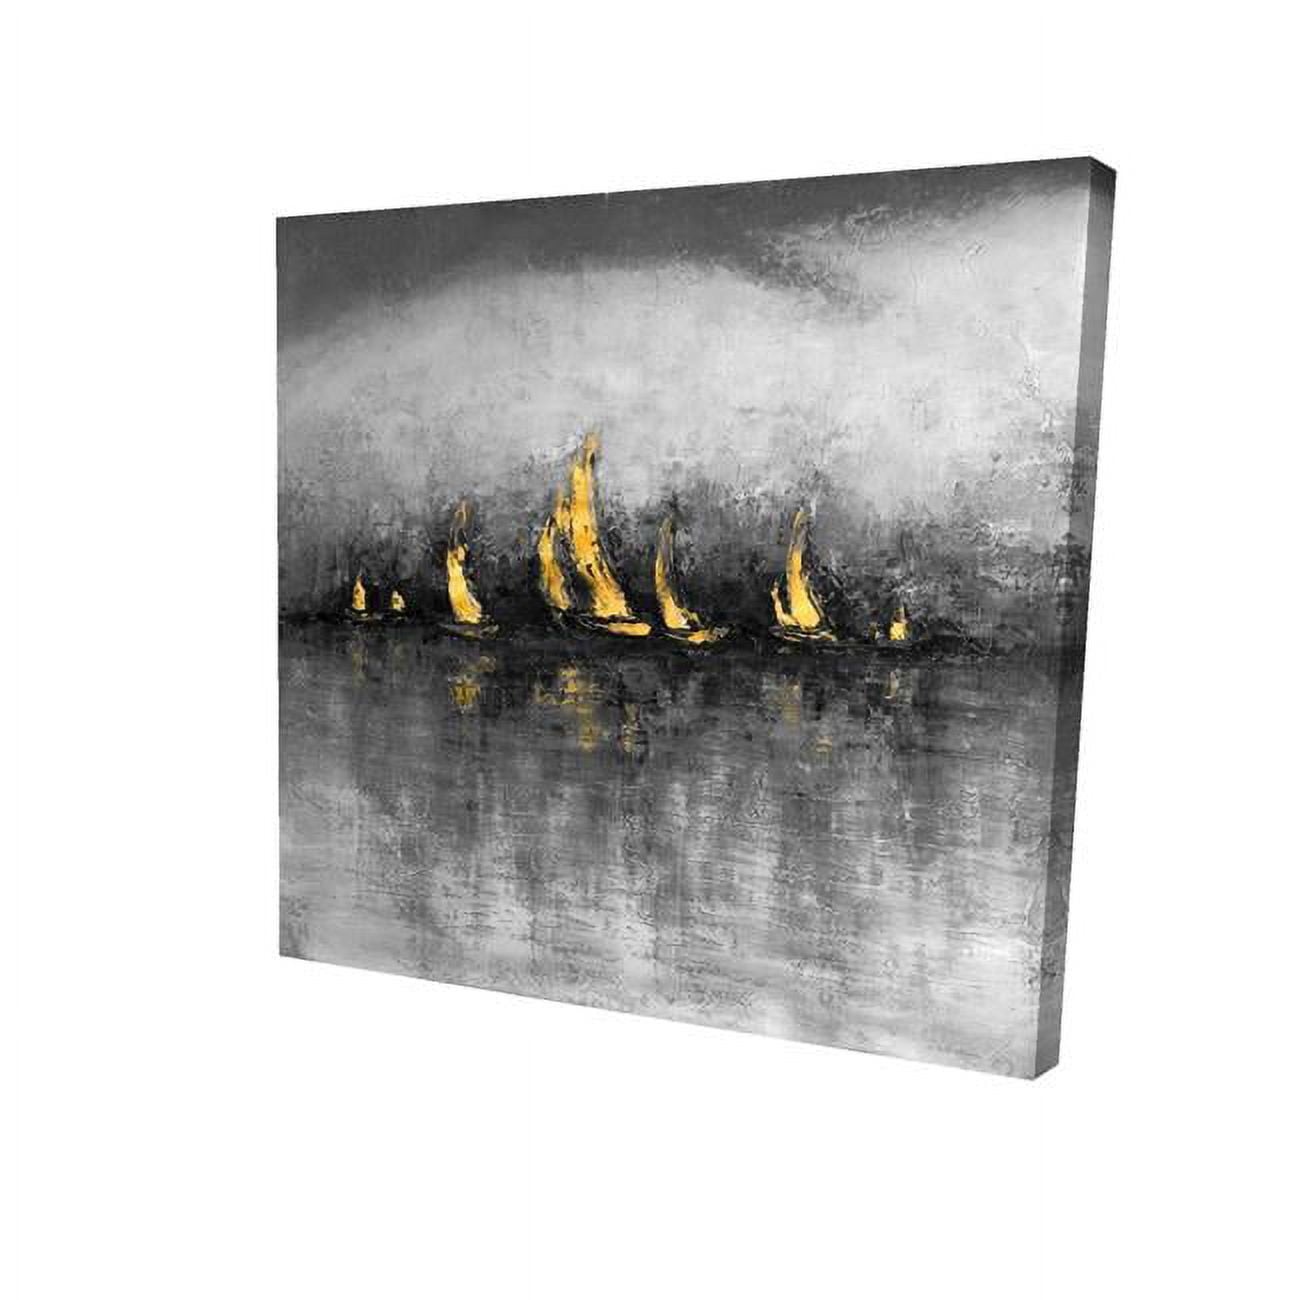 Begin Home Decor 2080-0808-CO159-1 8 x 8 in. Gold Sailboats-Print on Canvas